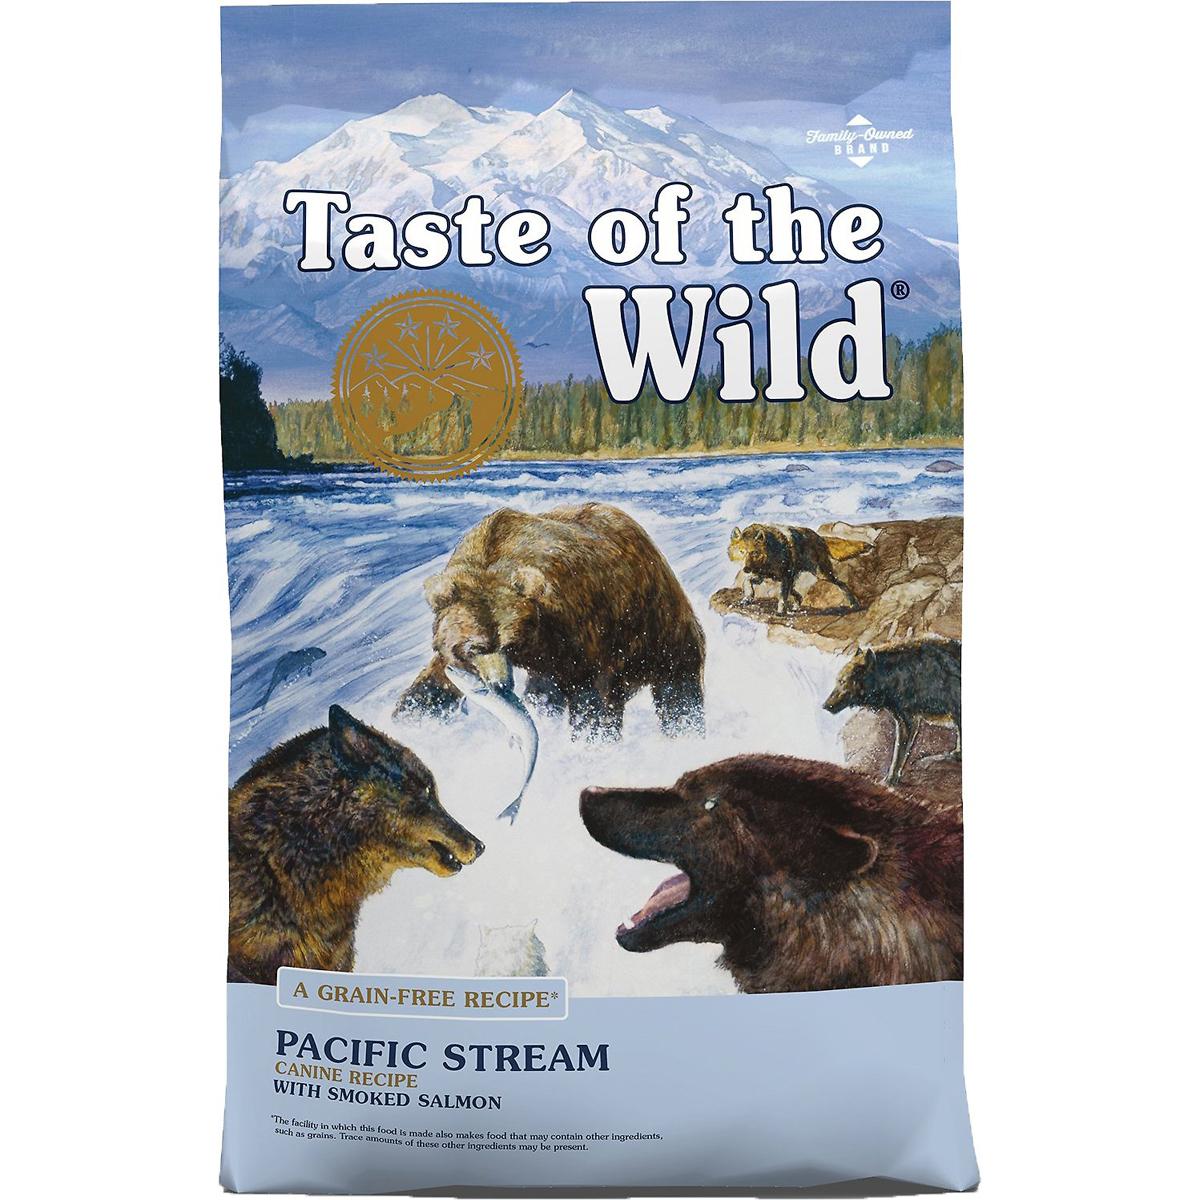 28lbs Taste of the Wild Smoked Salmon Dry Dog Food for $19.49